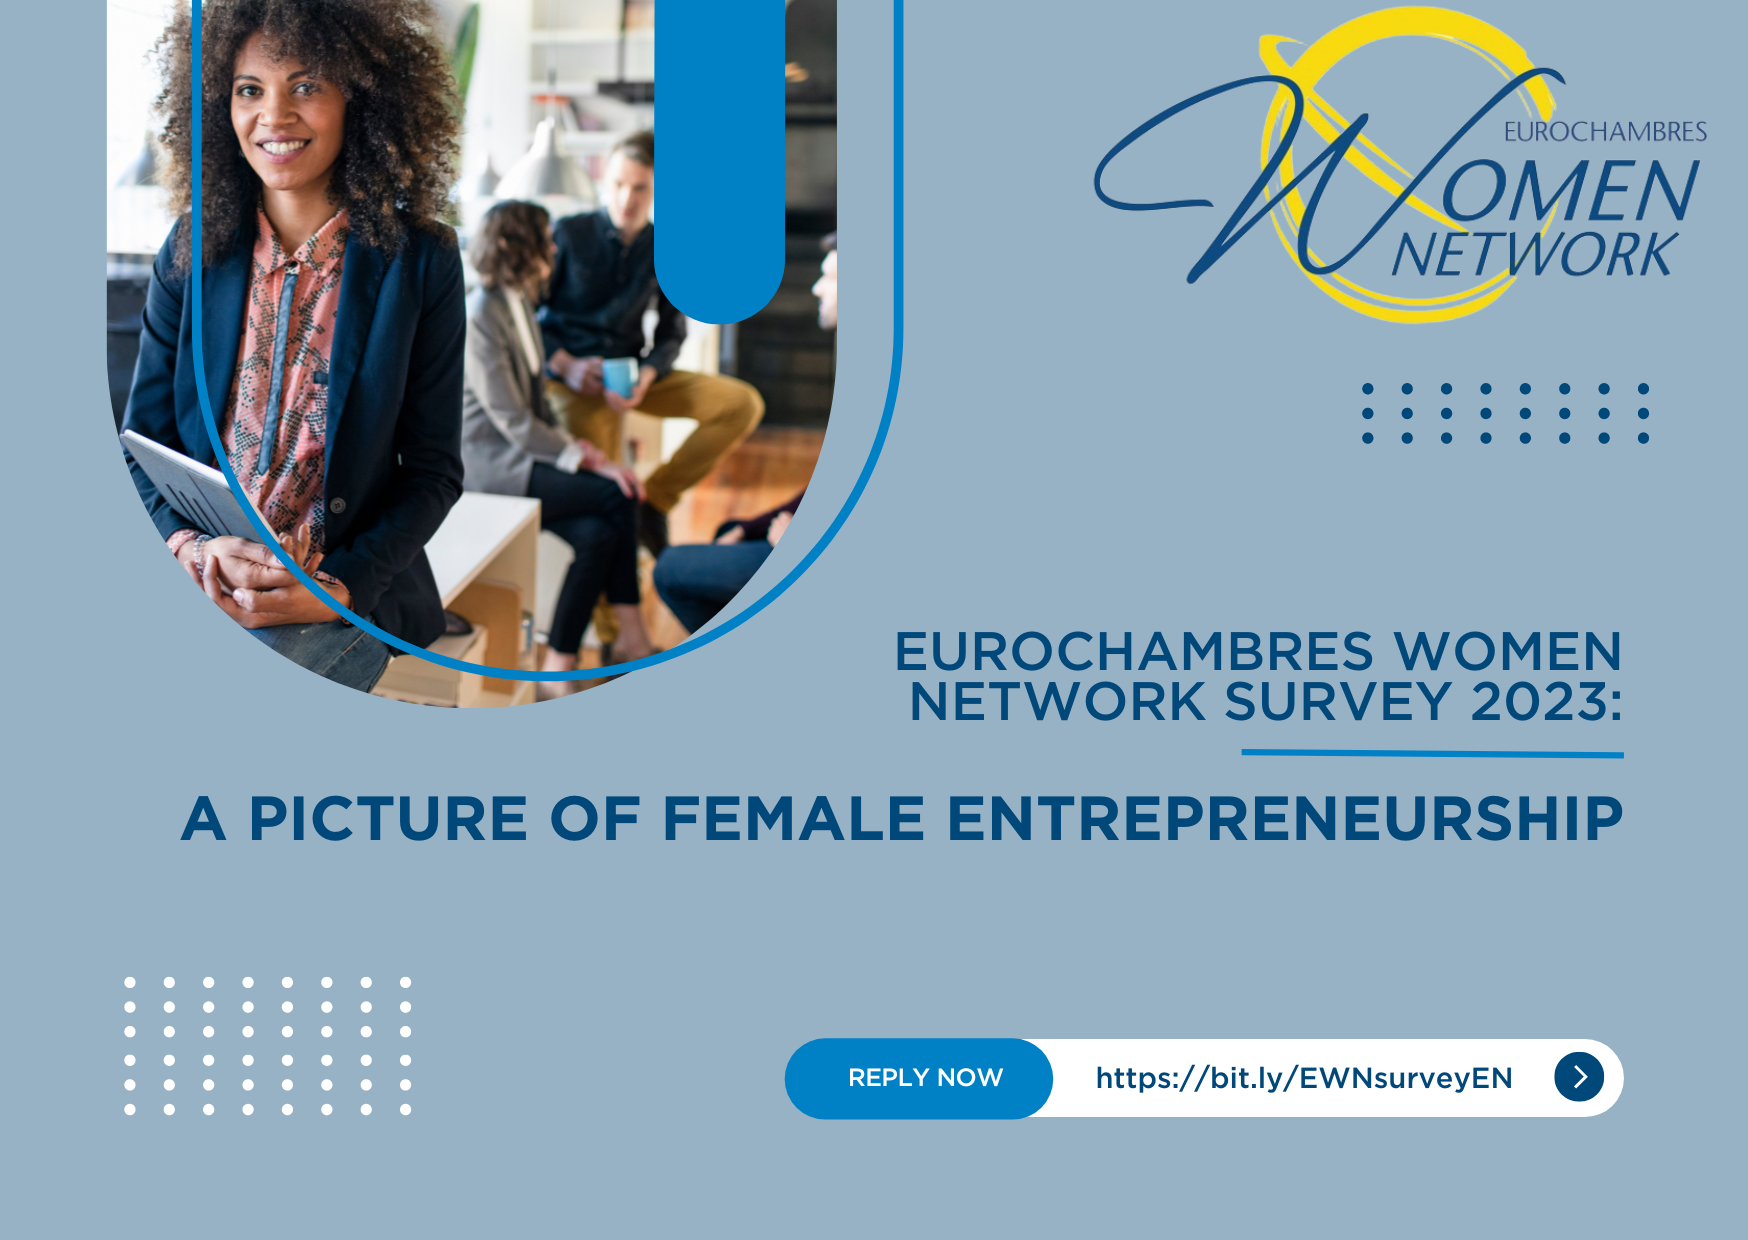 https://www.eurochambres.eu/event/women-entrepreneurship-and-the-pandemic-challenges-and-solutions-1-year-on/